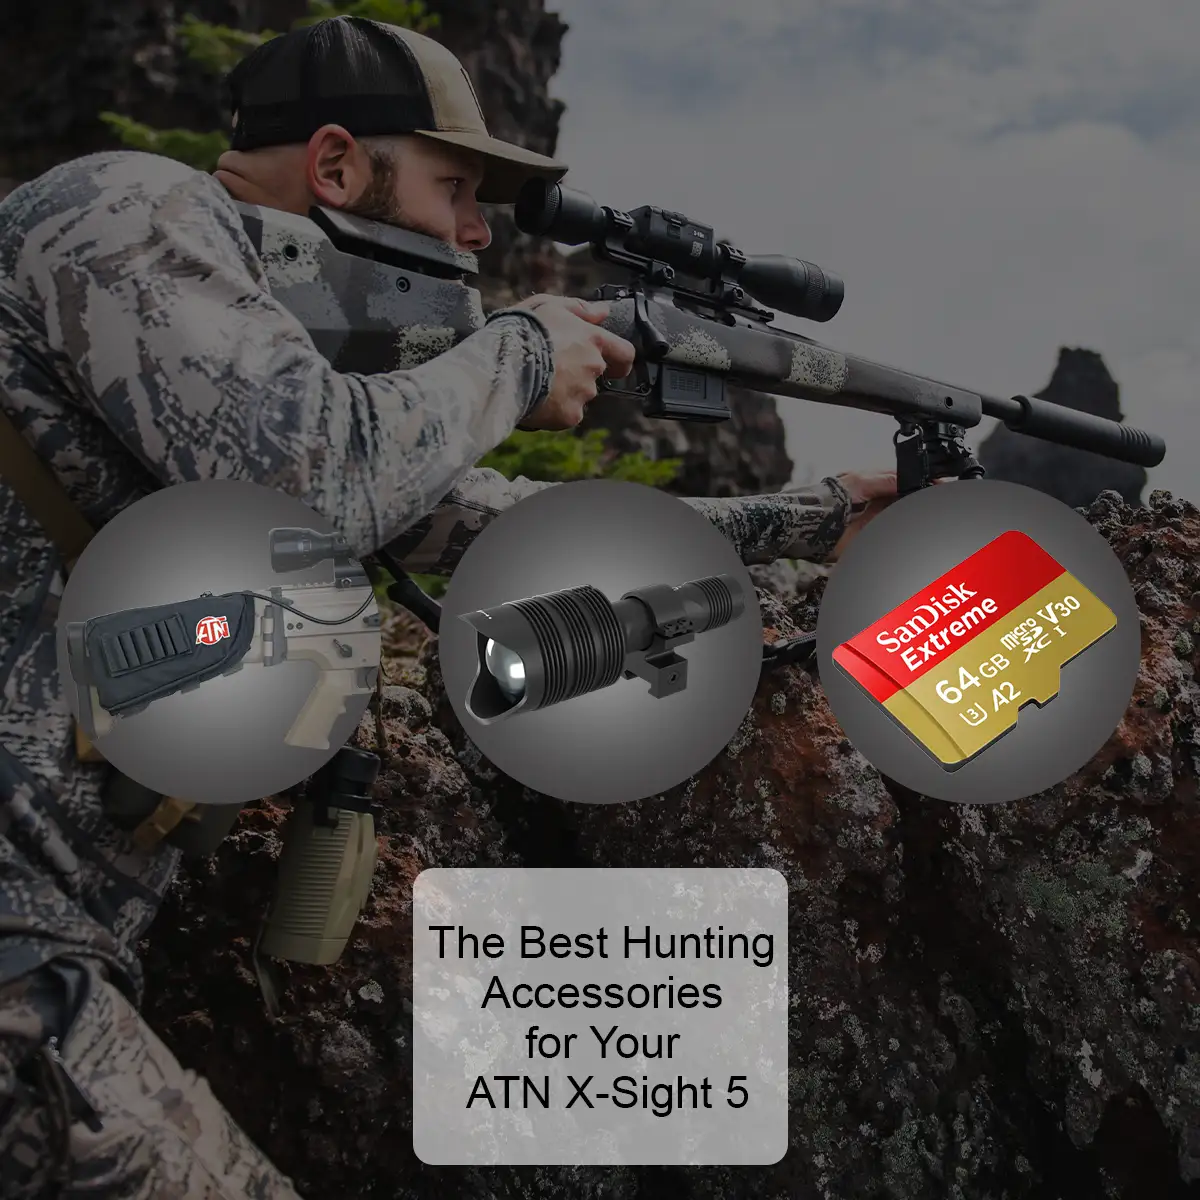 The Best Hunting Accessories for Your ATN X-Sight 5